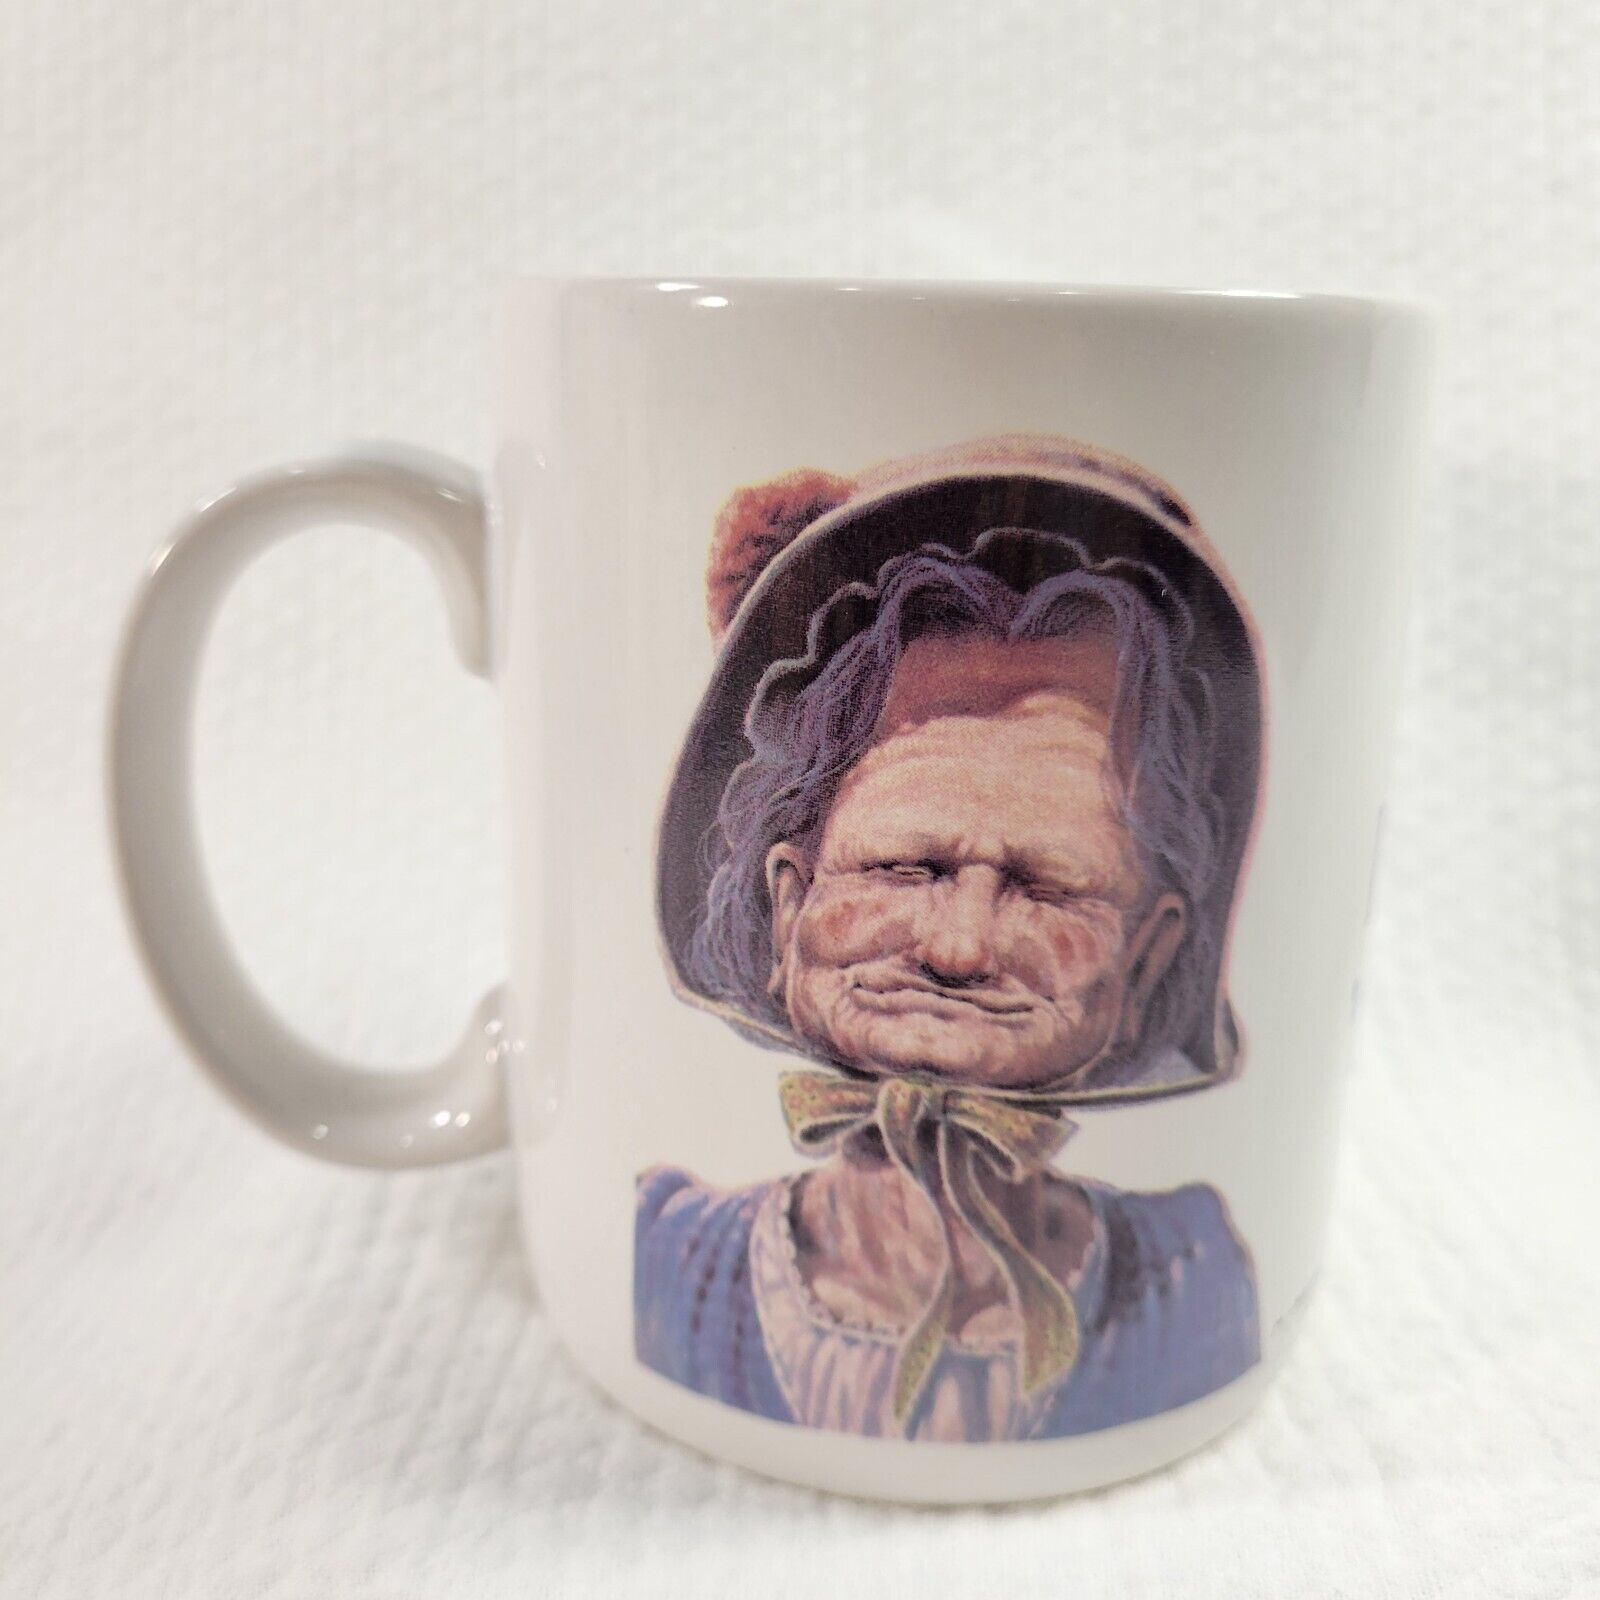 Vintage Leanin' Tree Mug Cup If Only I Can Last ‘til Friday by M. Scavel 1990 